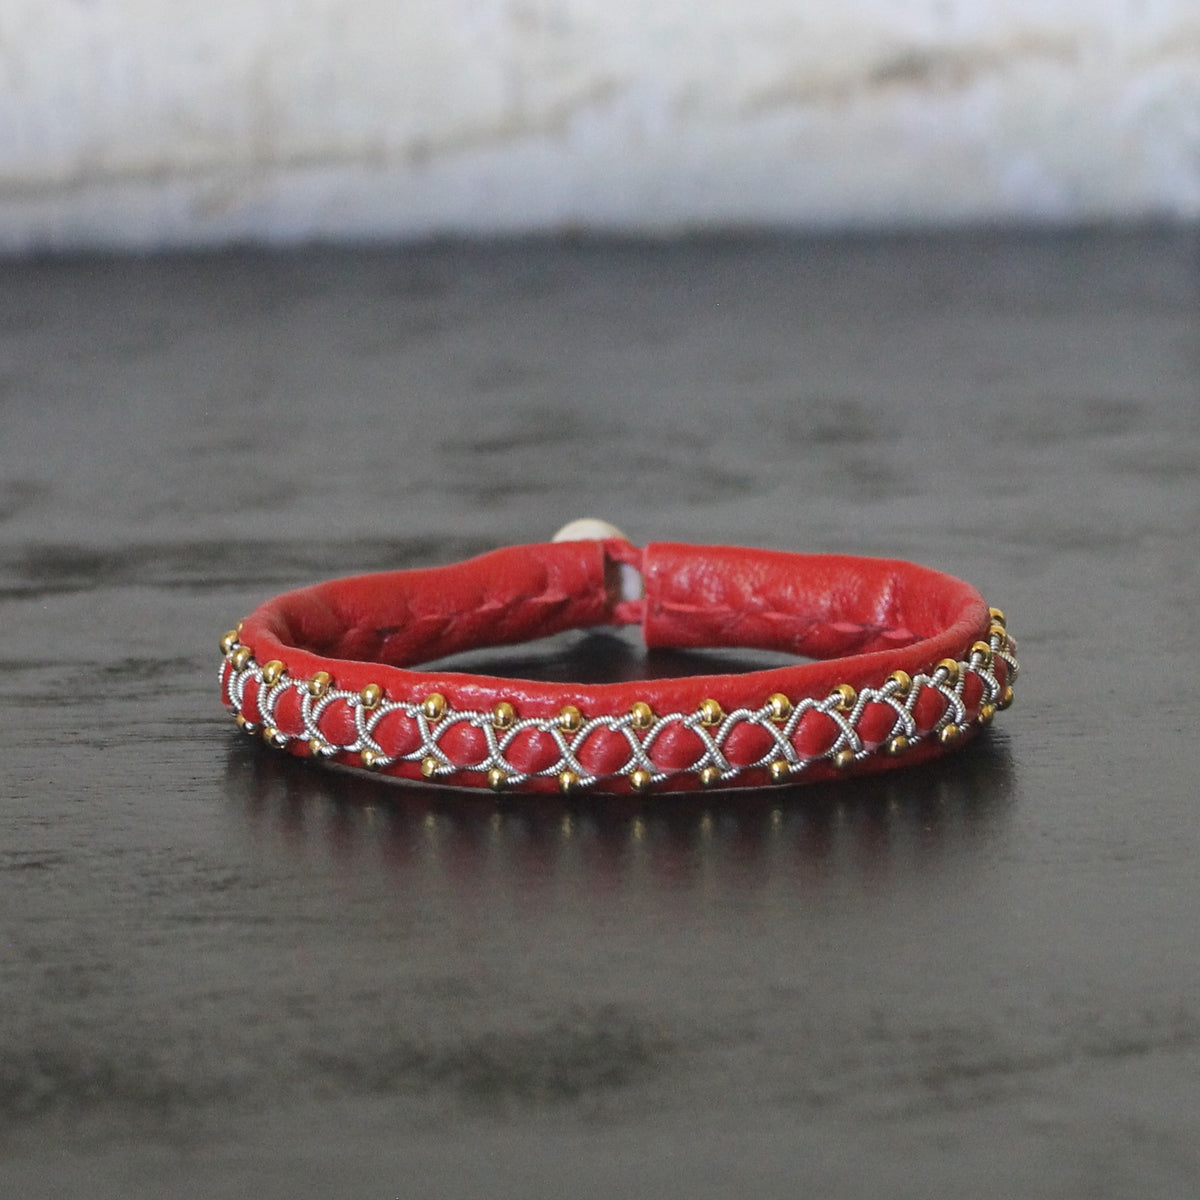 Red with Gold Beads 6 1/2"